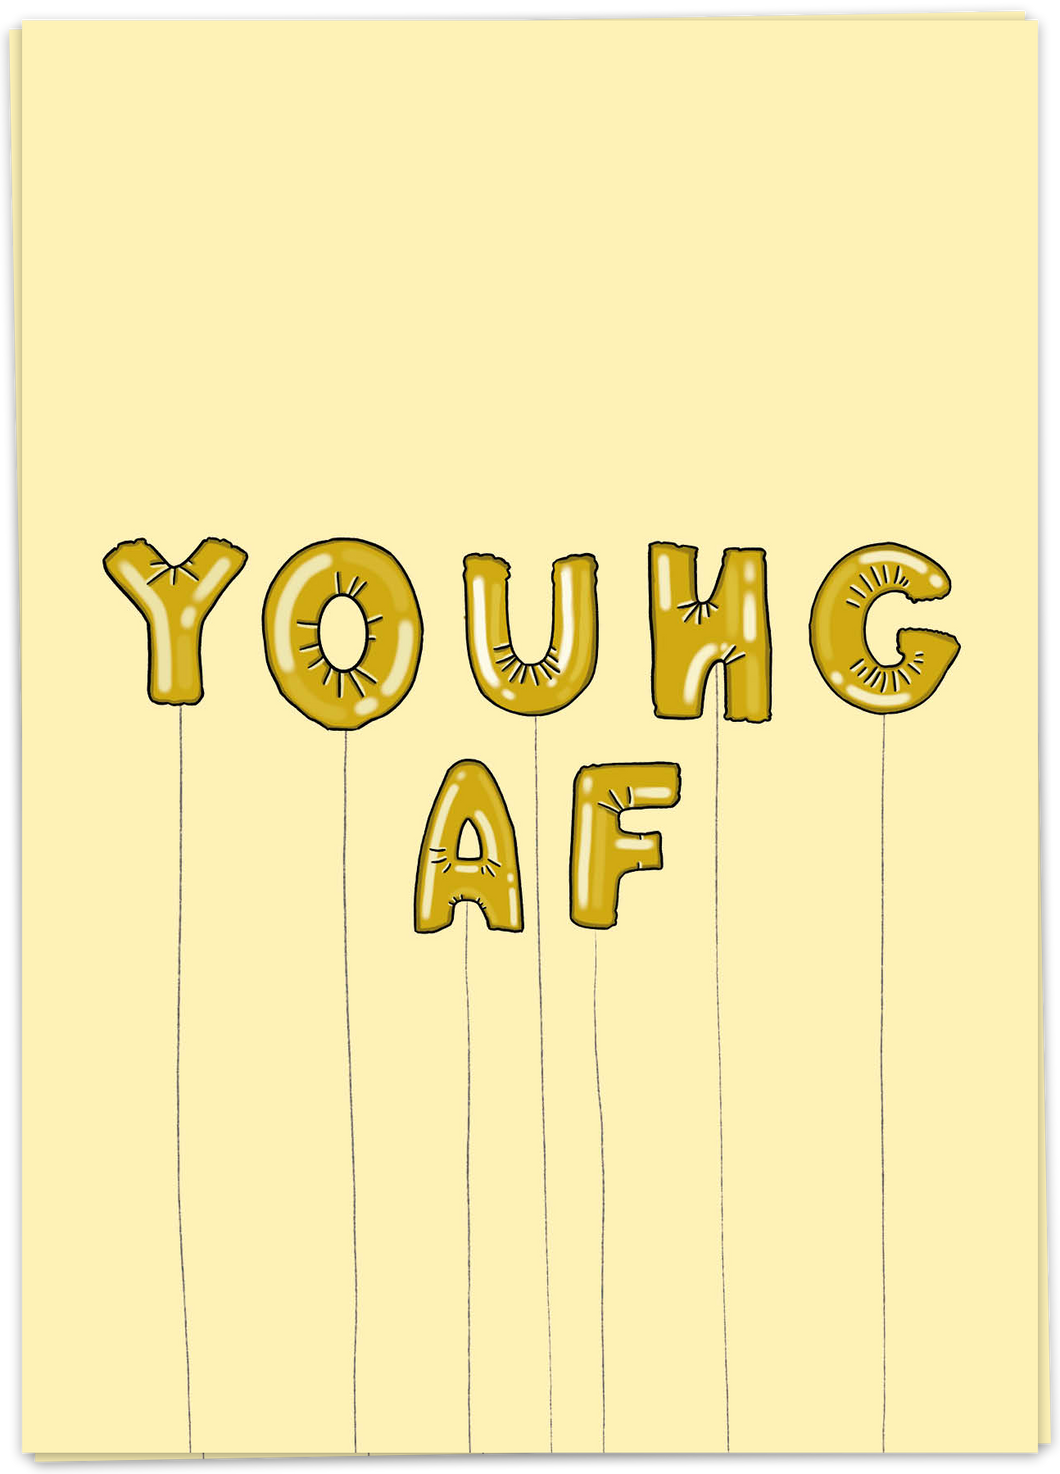 Kaart Blanche - Young AF